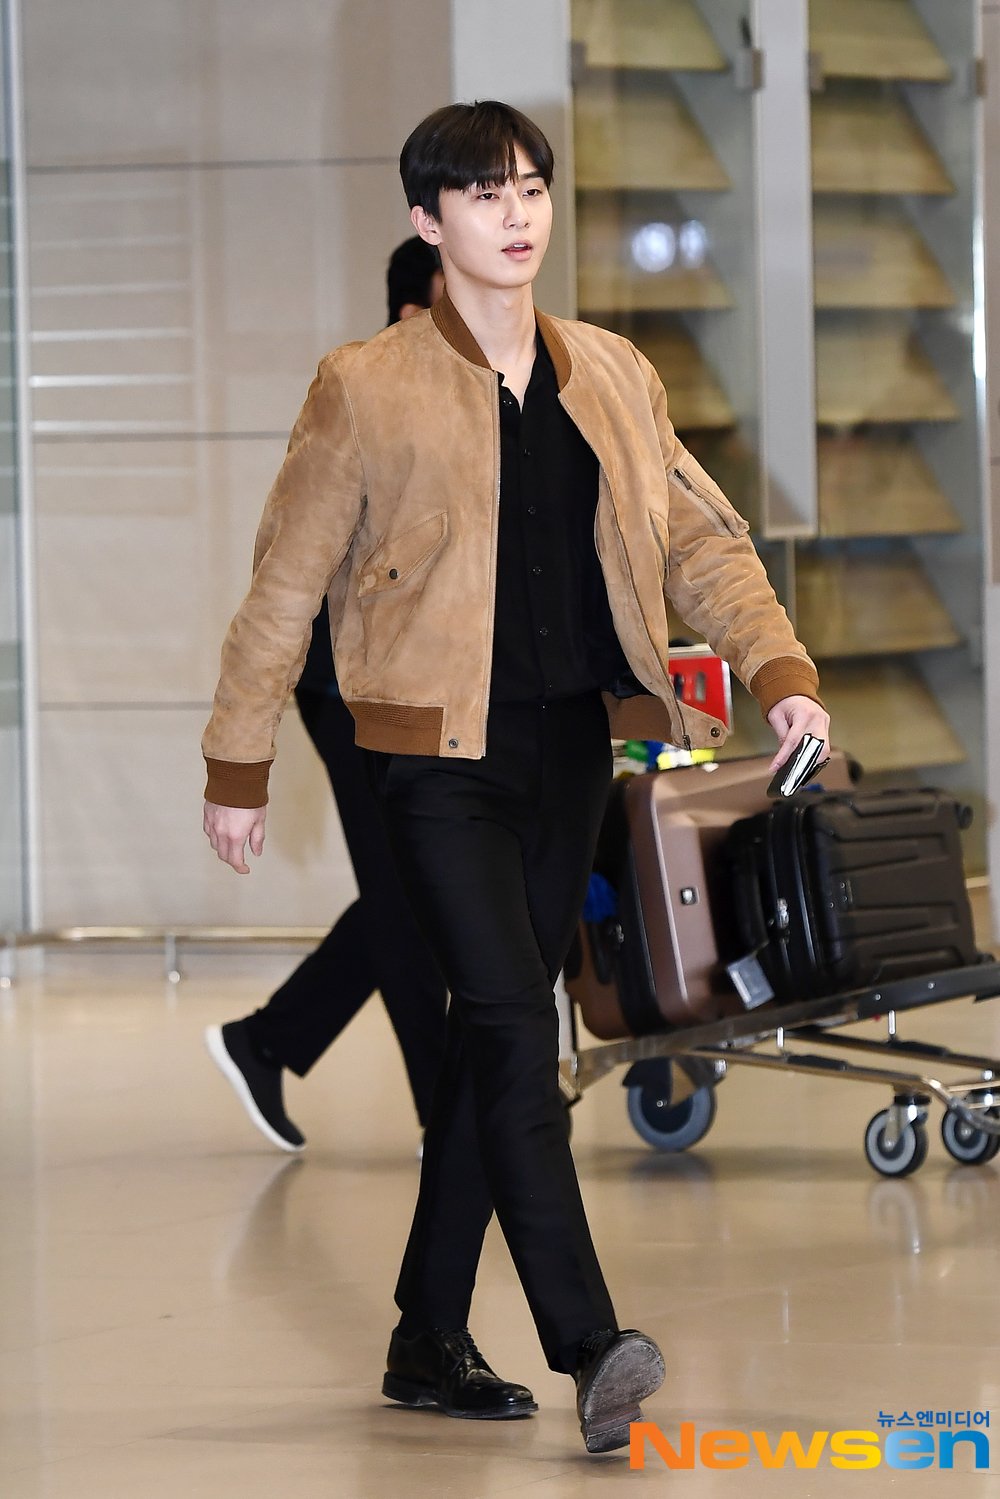 Actor Park Seo-joon arrived in Hong Kong through Incheon International Airport in Unseo-dong, Jung-gu, Incheon on the afternoon of March 18 after finishing the schedule of the 13th Asian Film Awards (2019: AFA) awards ceremony.exponential earthquake